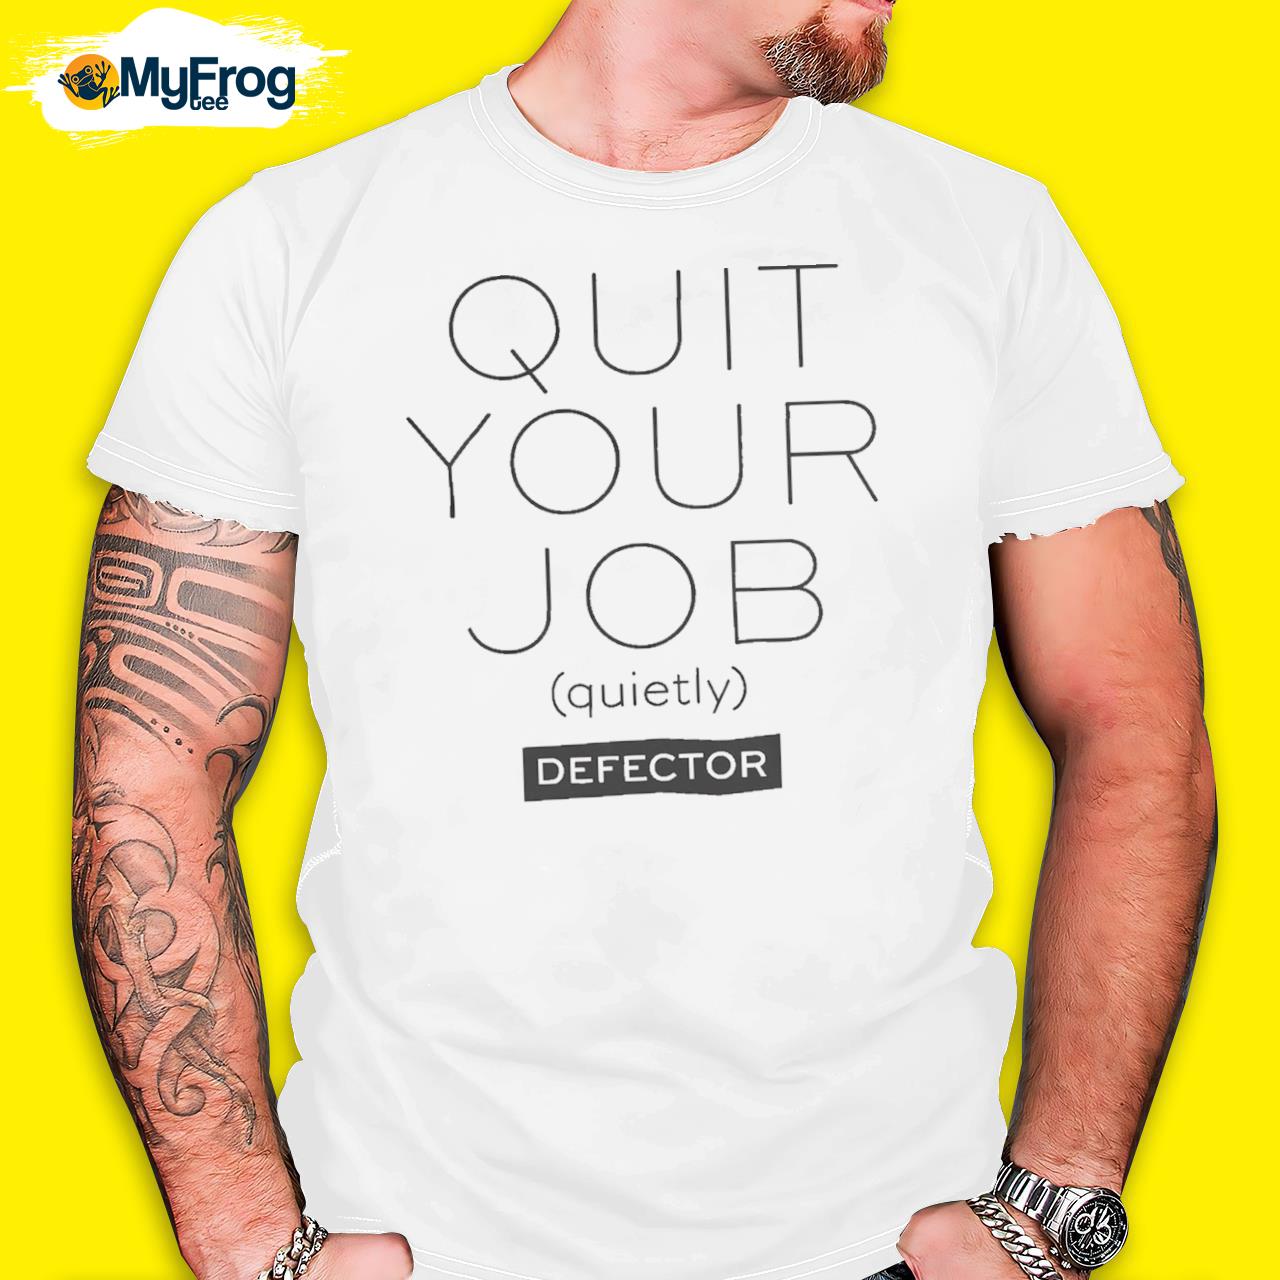 Quit your job quietly new shirt